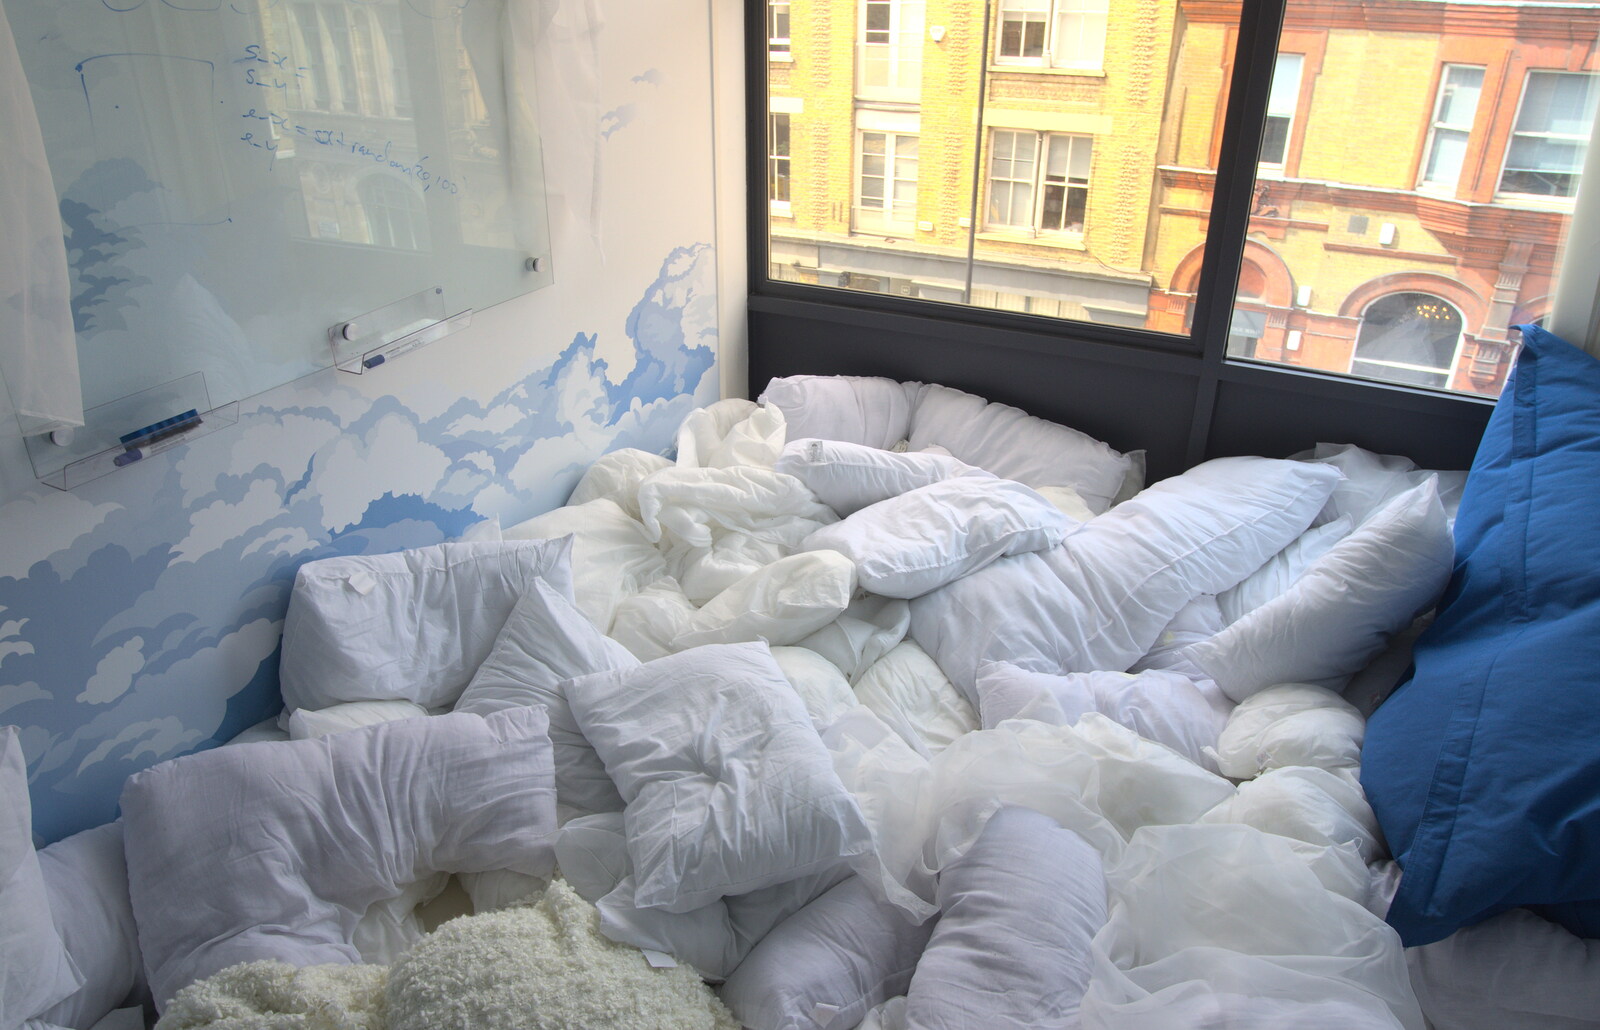 There's a room full of pillows from A SwiftKey Innovation Week, Southwark, London - 22nd April 2016